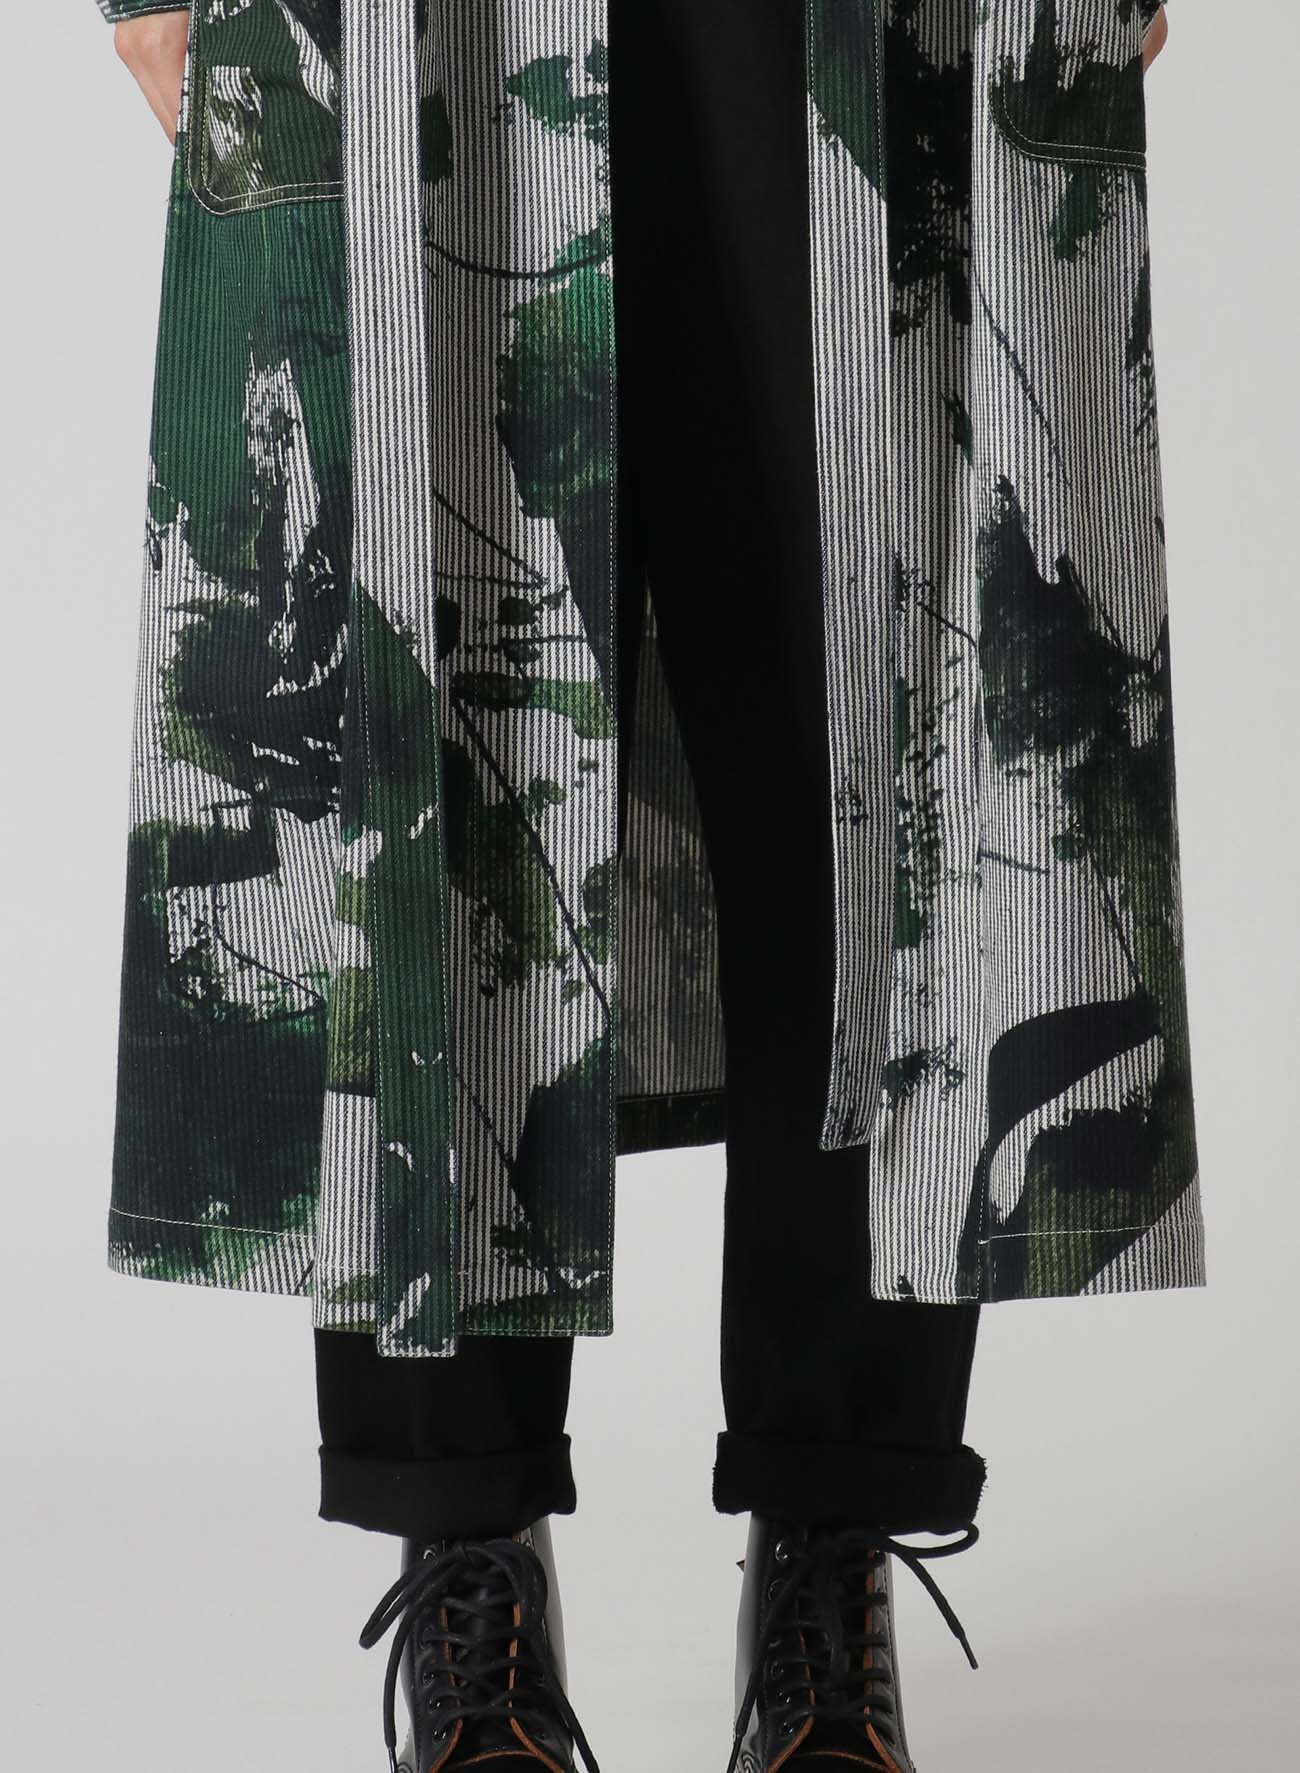 COTTON HICKORY SURGICAL GOWN WITH ABSTRACT PRINT